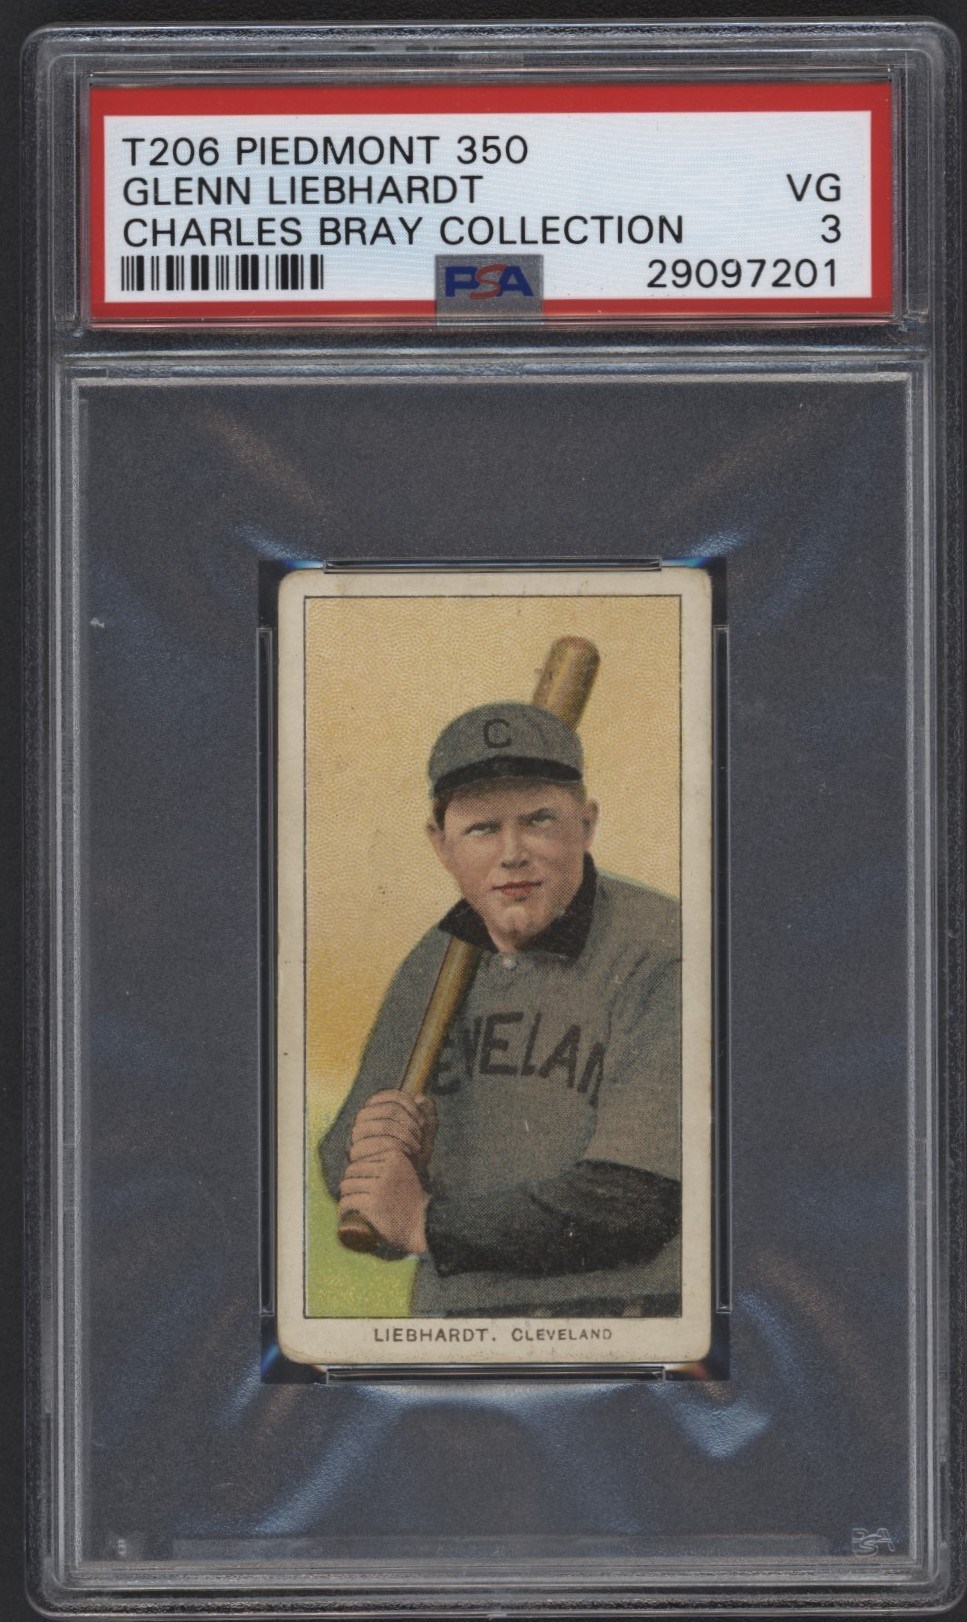 - T206 Piedmont 350 Glenn Liebhardt PSA 3 From the Charles Bray Collection